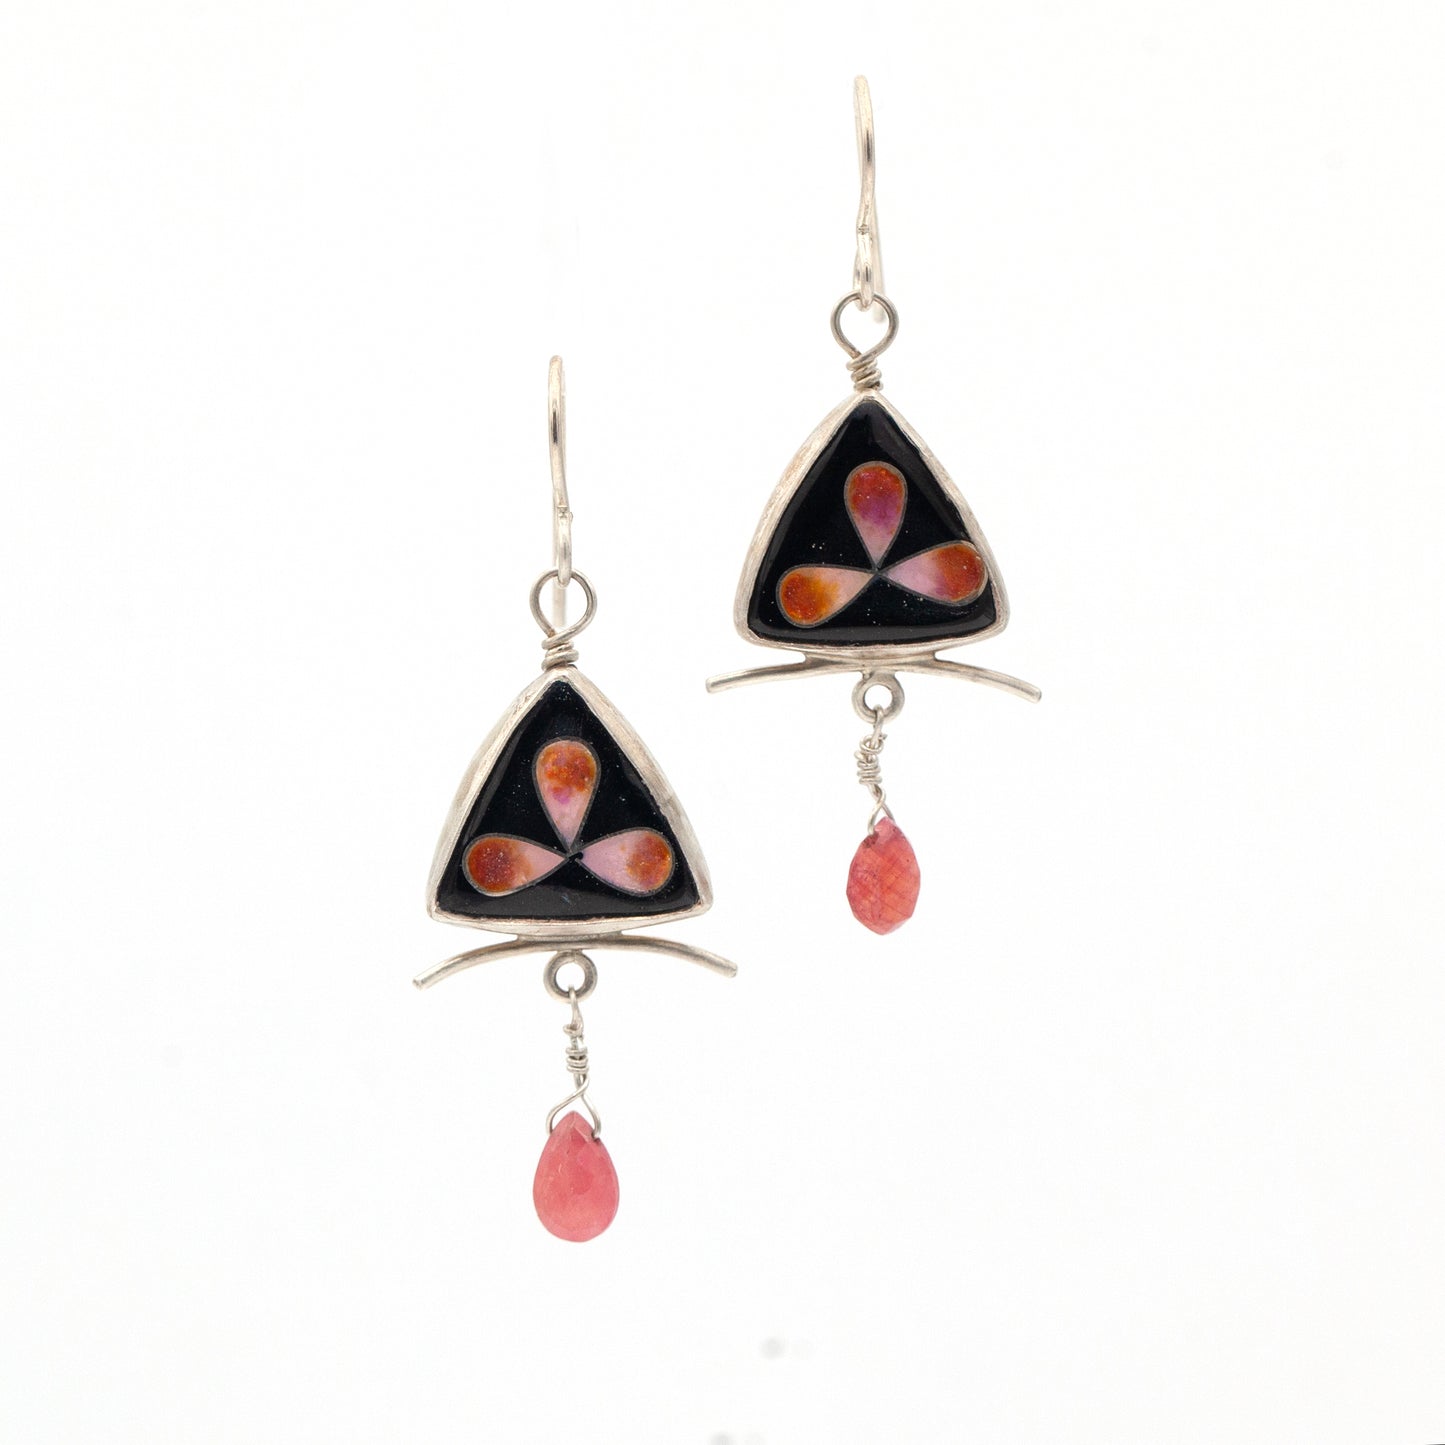 Vitrice McMurry Sterling Silver Cloisonne Earrings with Ruby